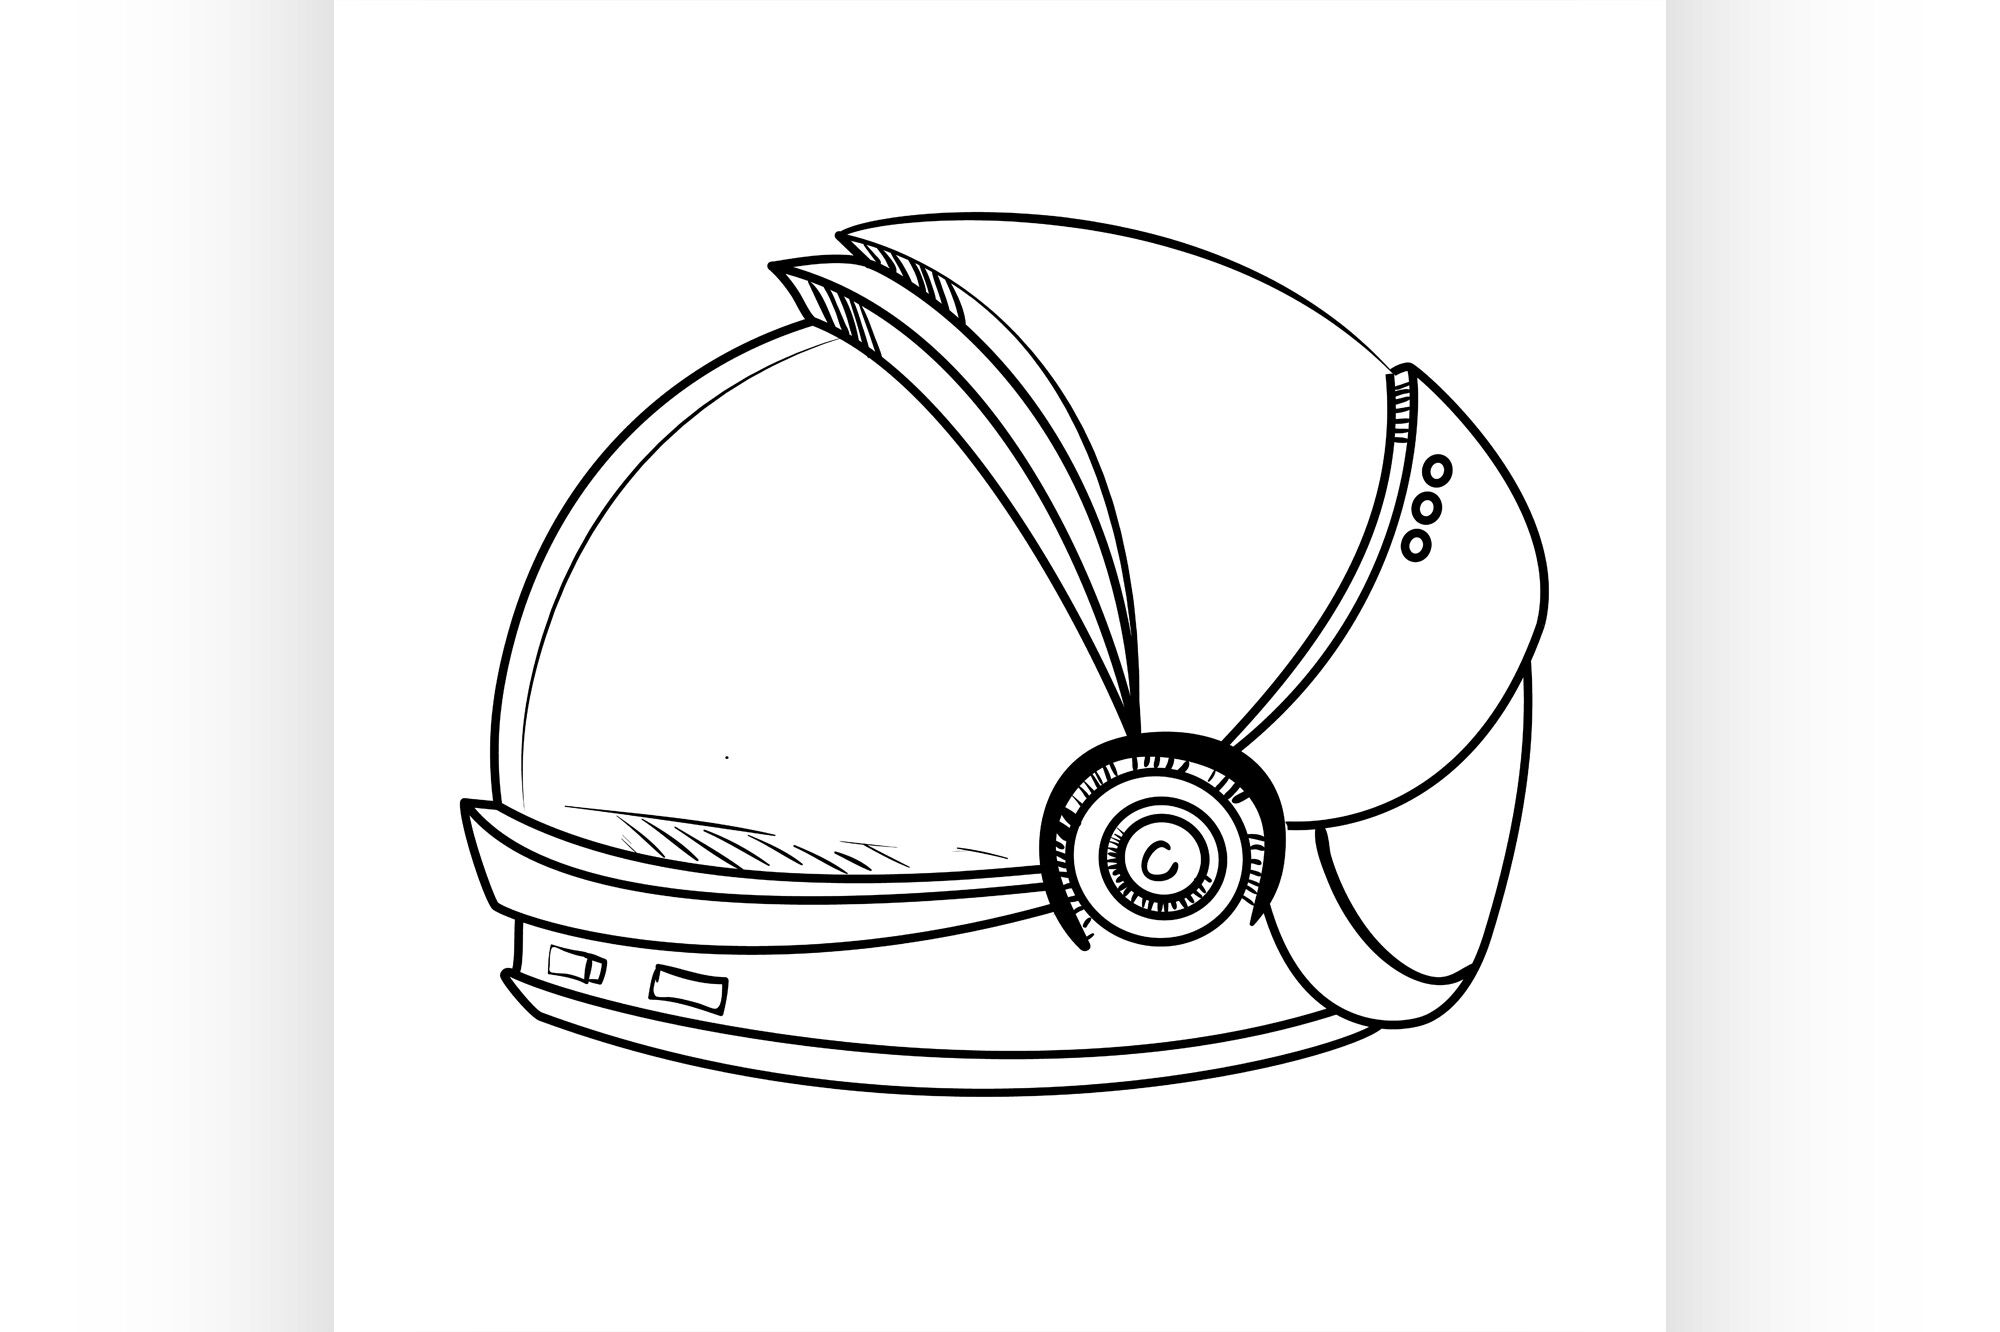 Easy How to Draw an Astronaut Tutorial and Coloring Page